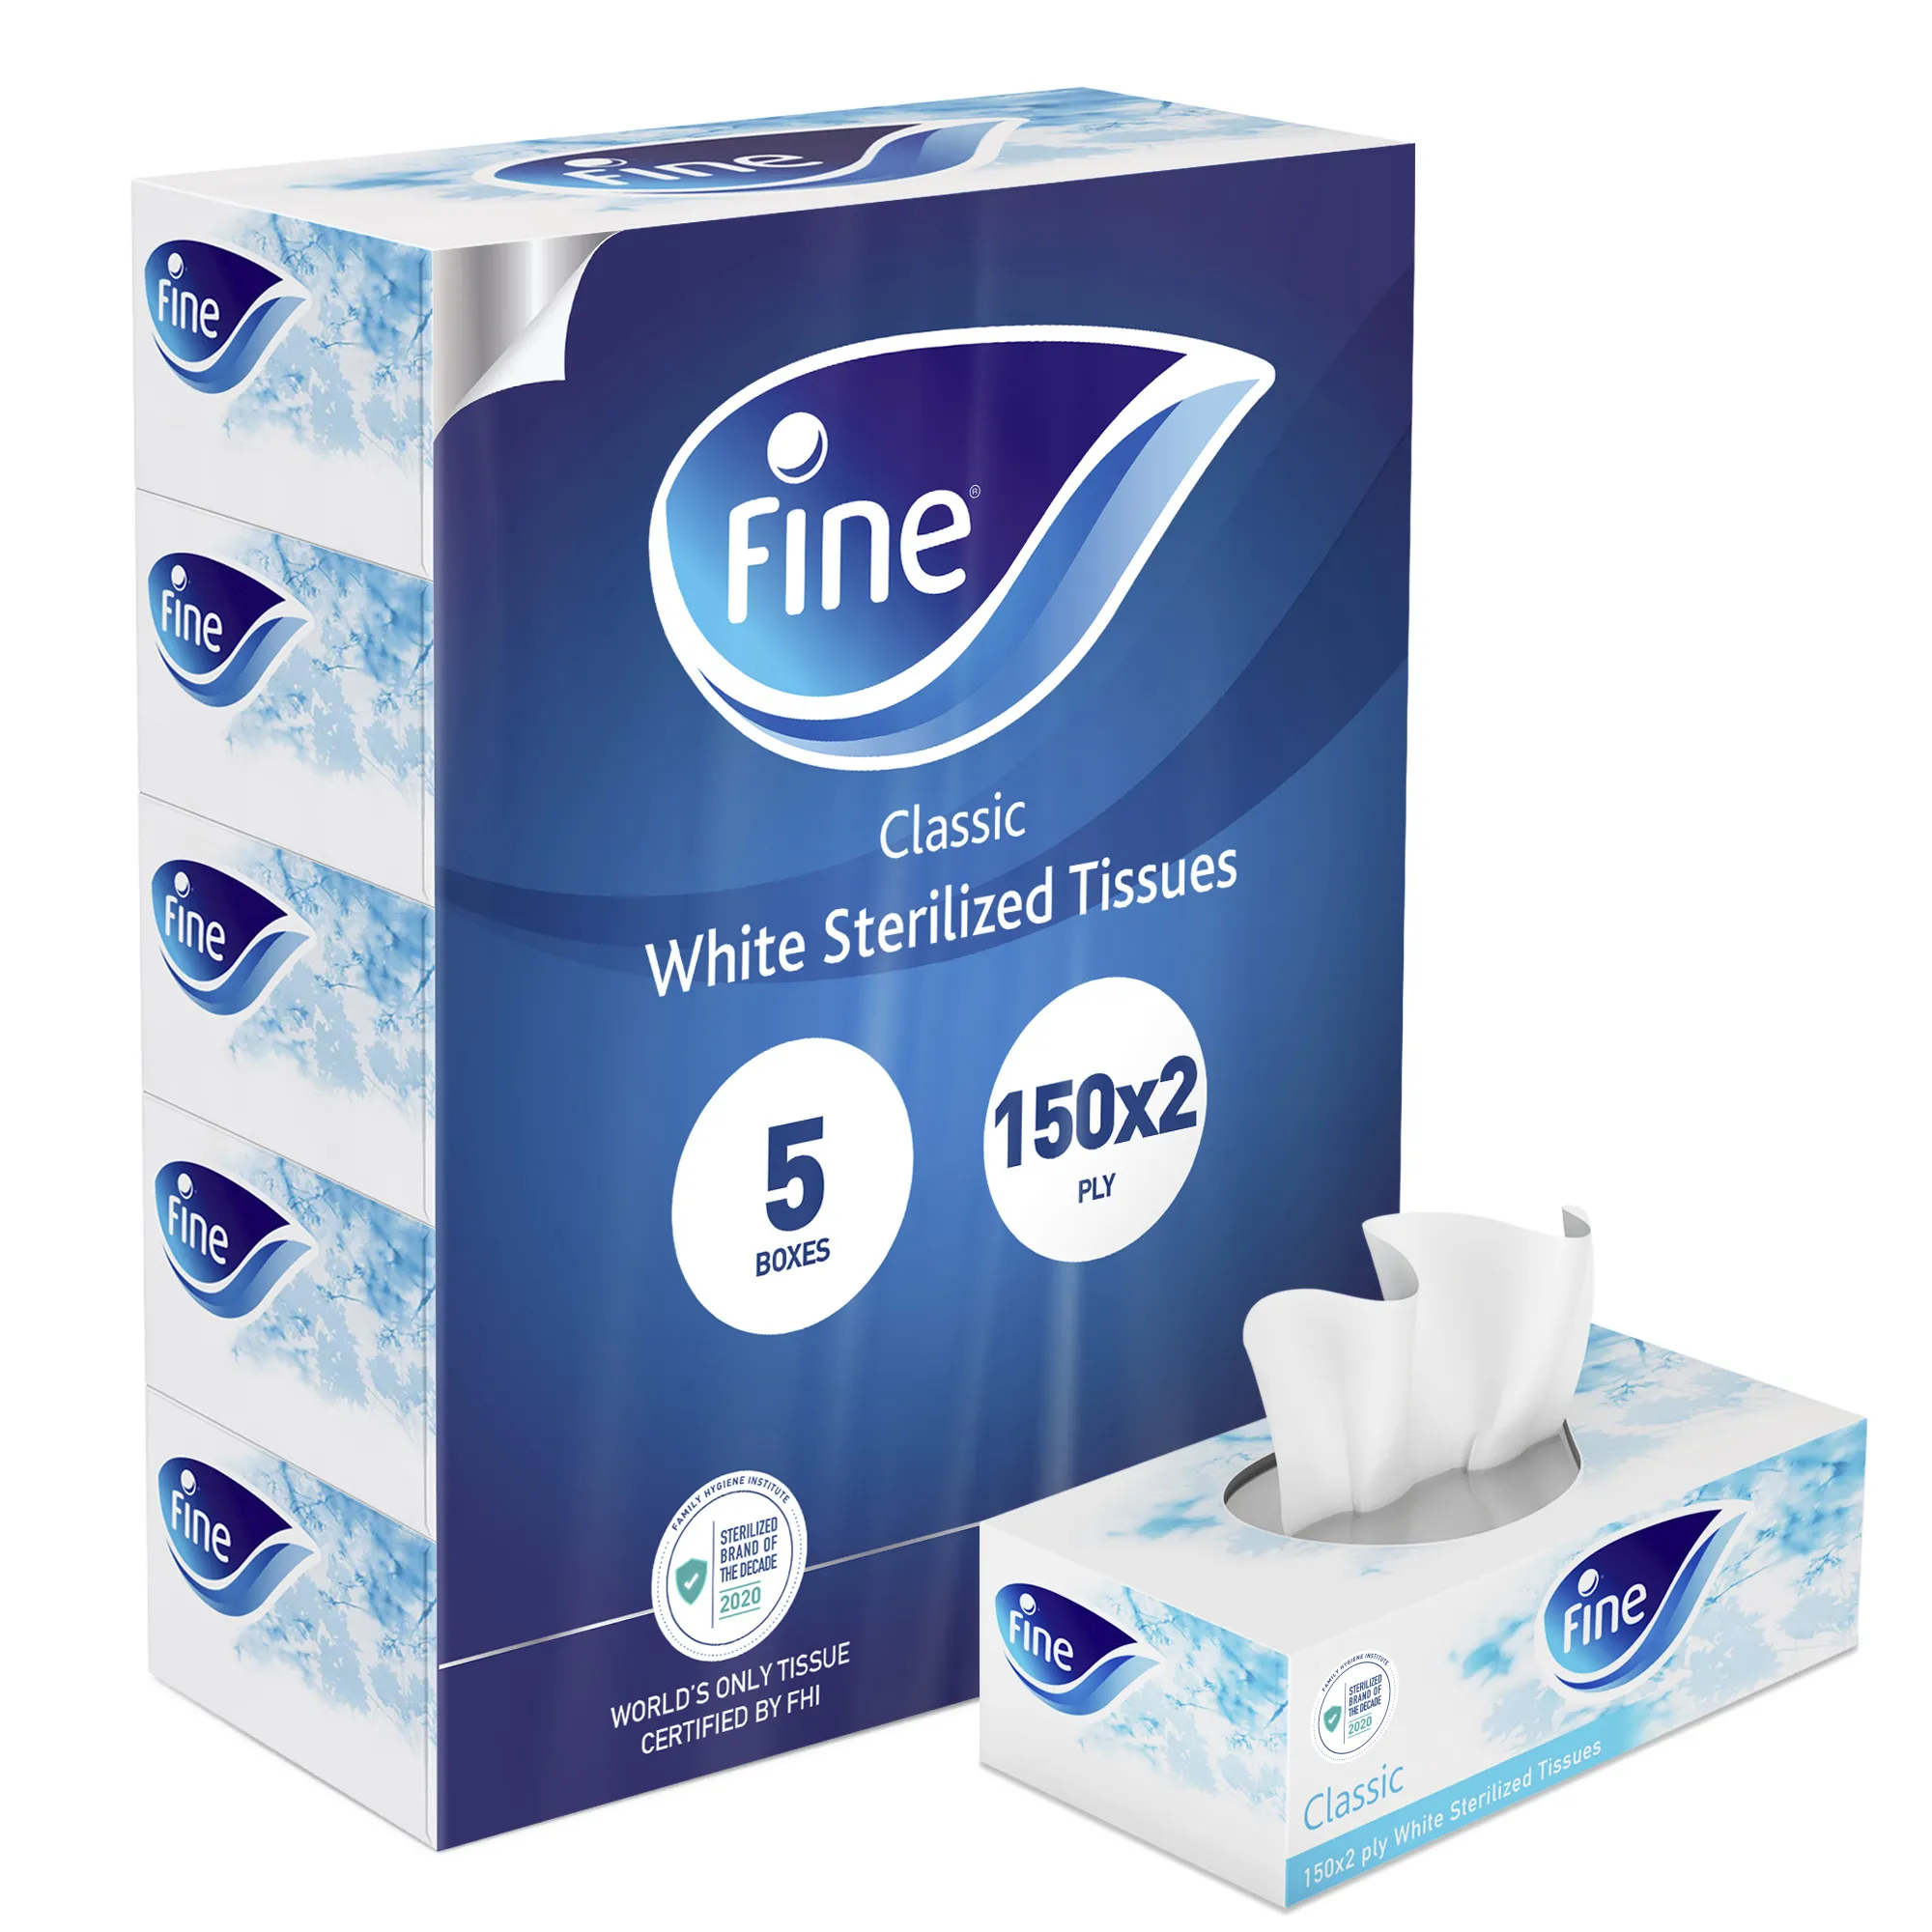 Fine, Facial Tissues, Classic Euphoria, 150x2 Ply White Tissues, pack of 5 boxes, 750 tissues